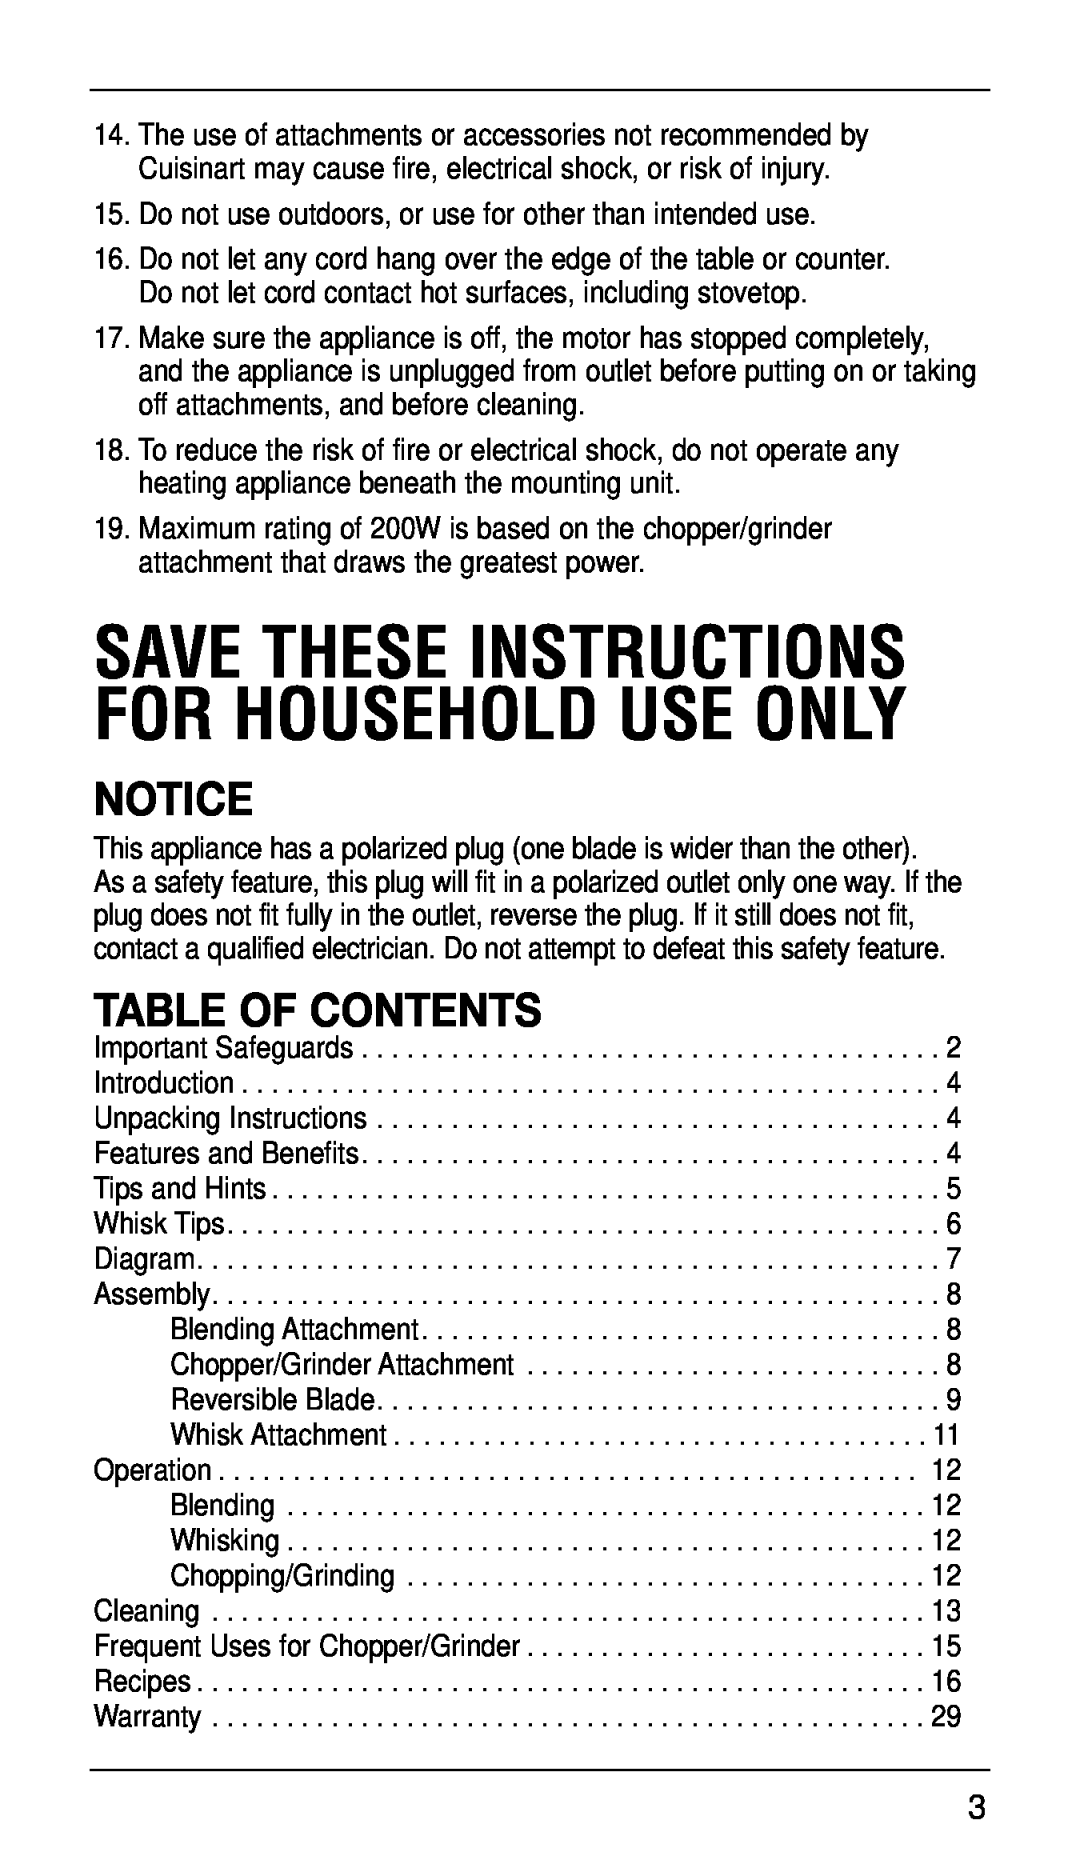 Cuisinart CSB-77 manual Table Of Contents, Save These Instructions For Household Use Only 